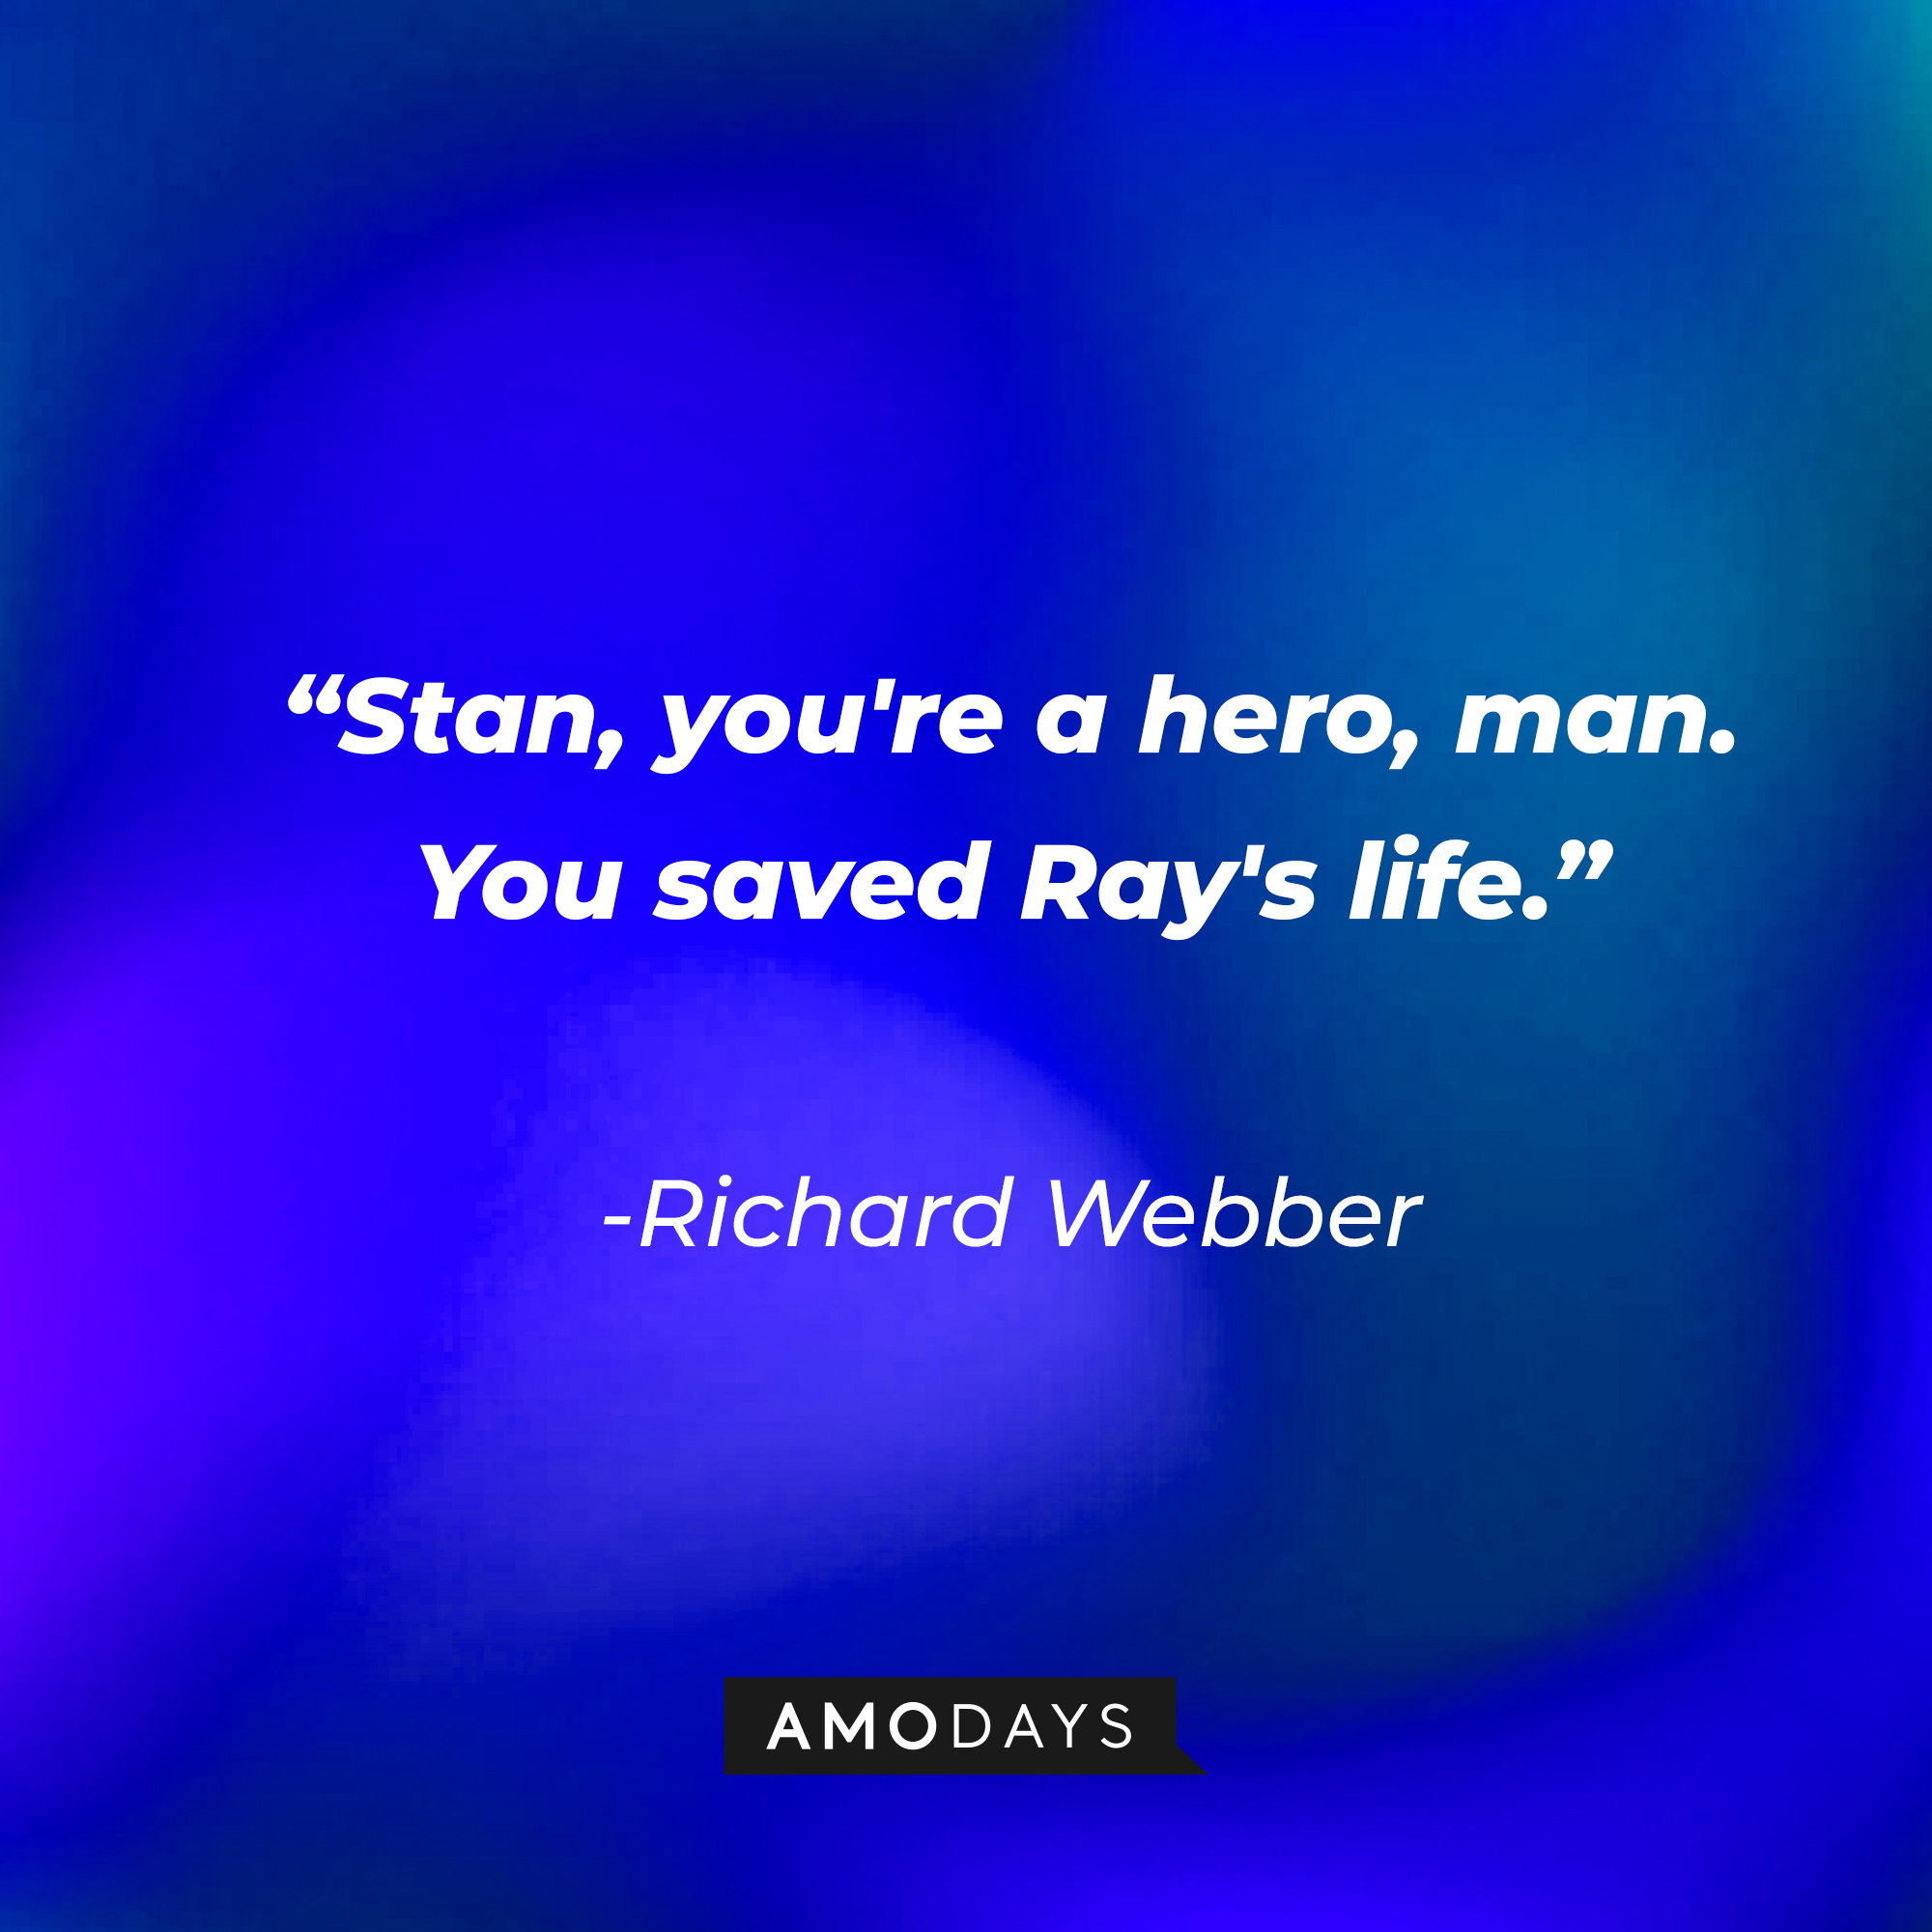 Richard Webber with his quote: "Stan, you're a hero, man. You saved Ray's life." | Source: Amodays